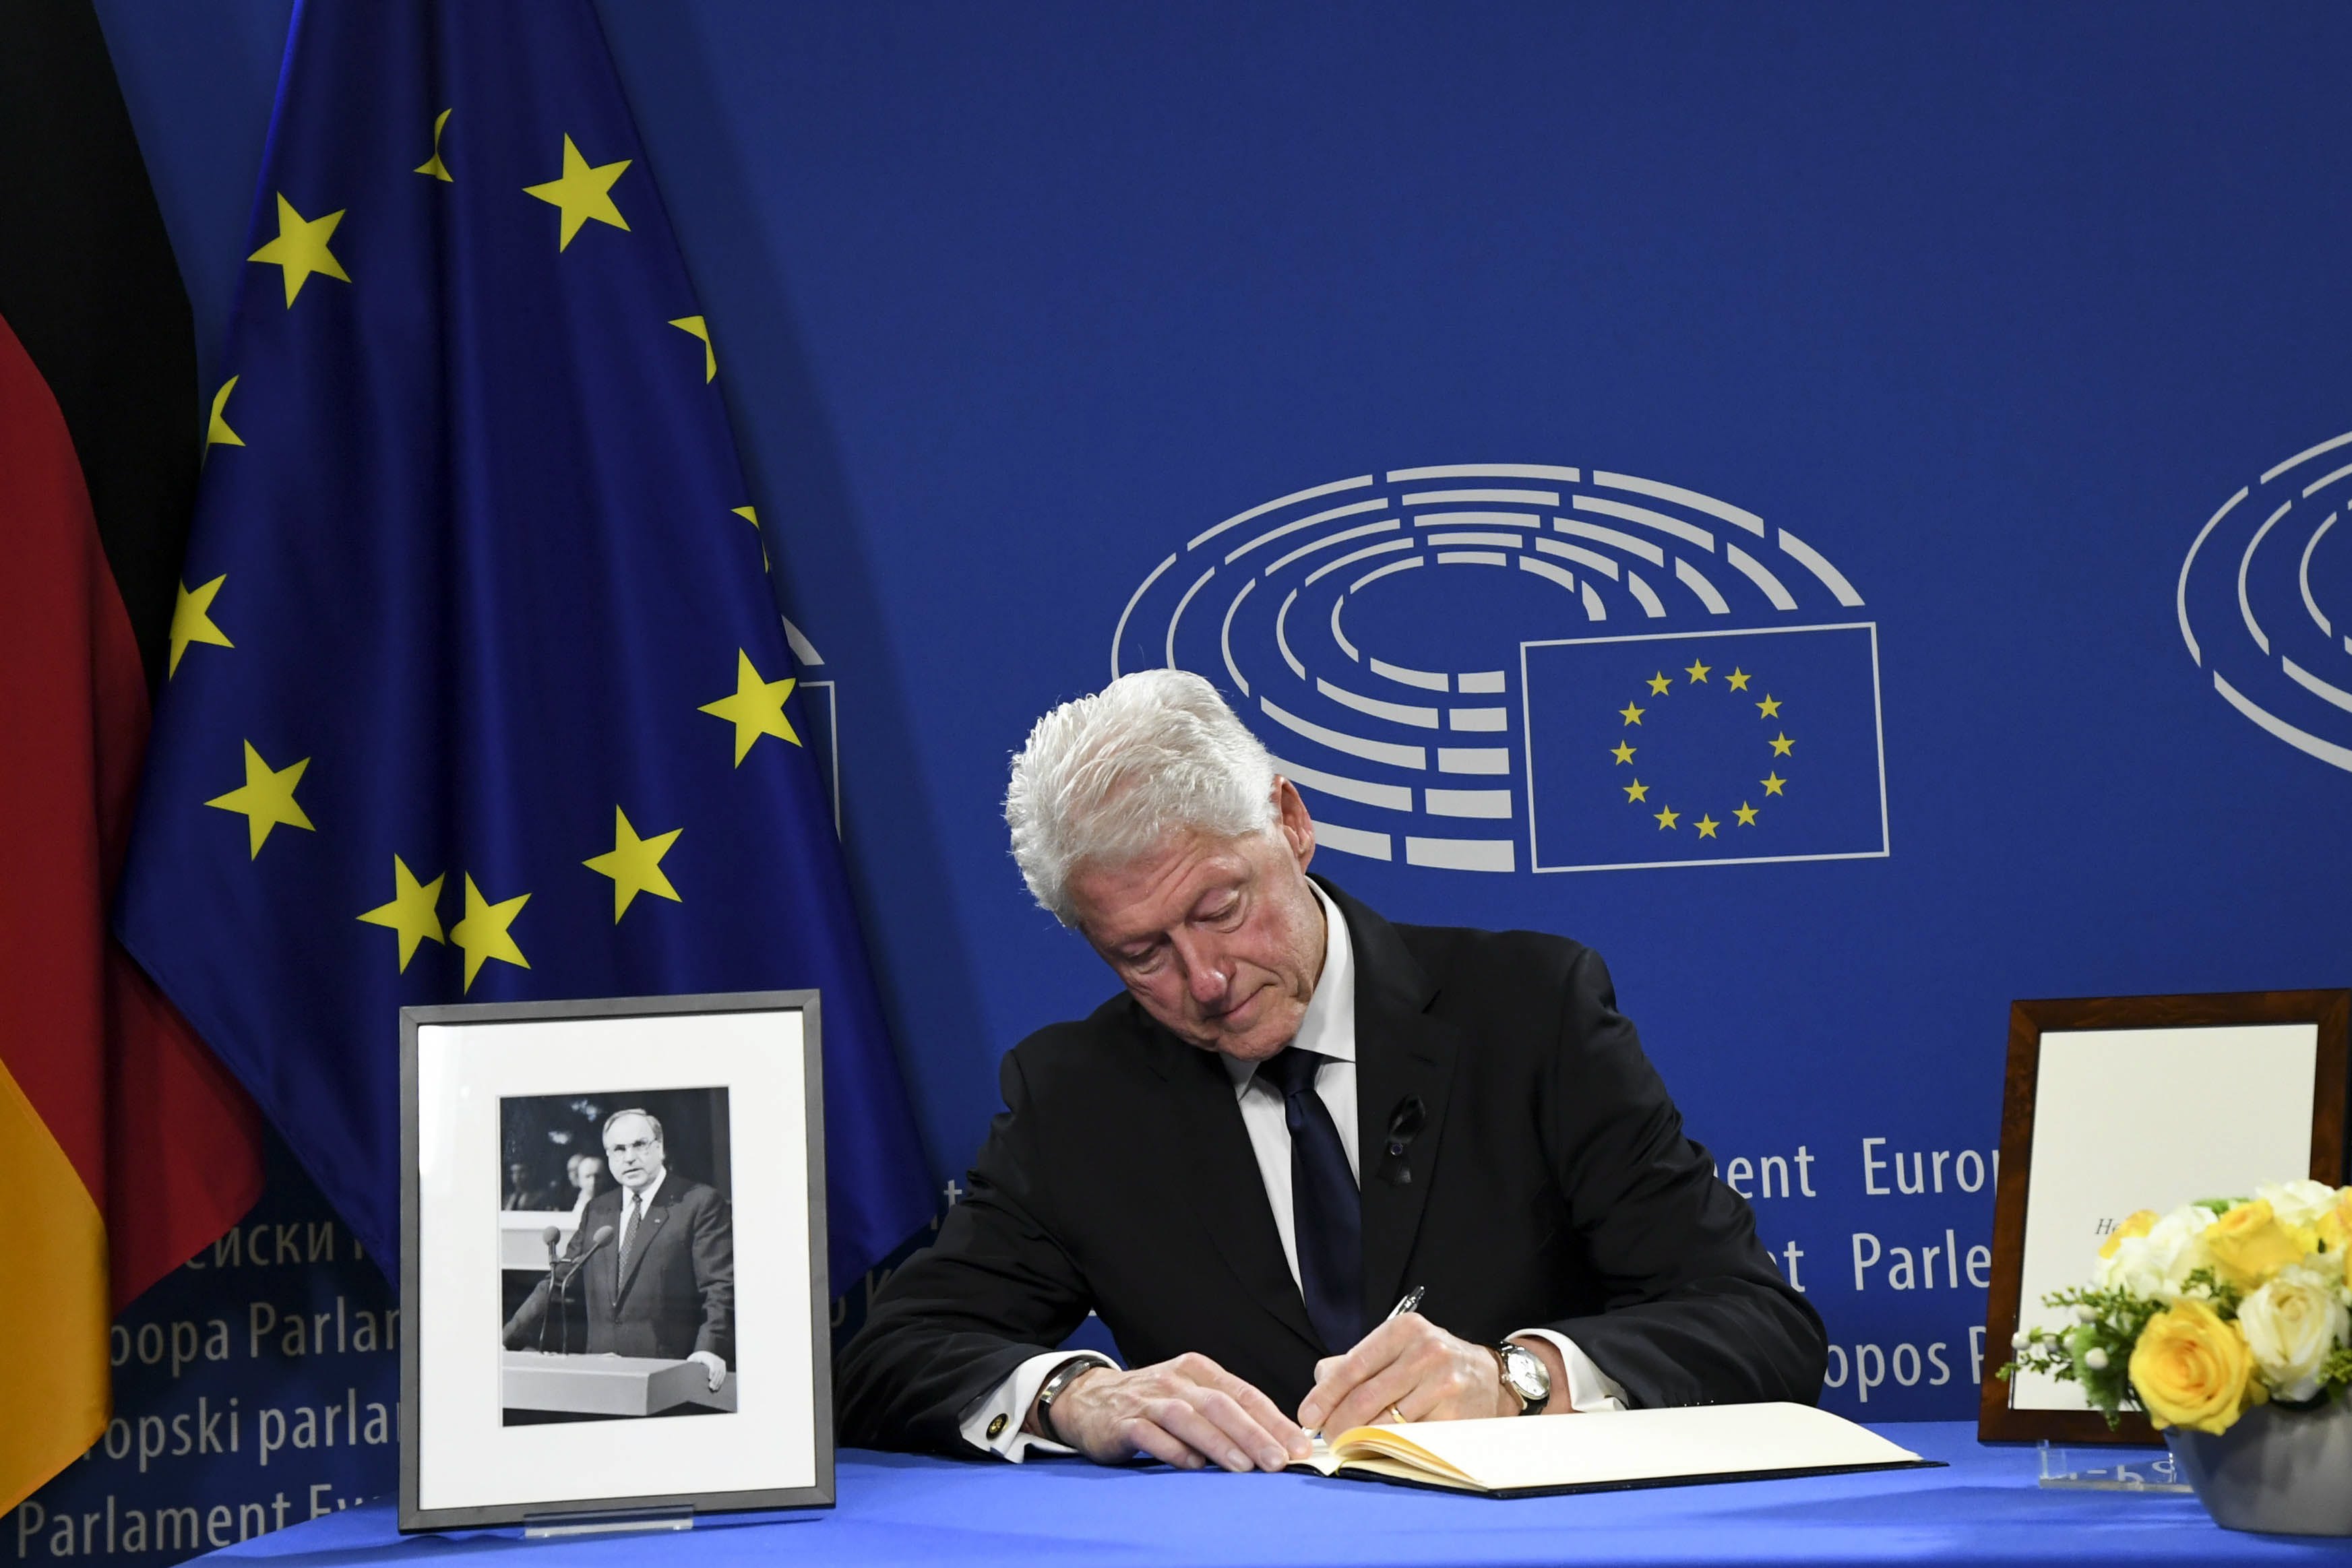 2017-07-01 06:33:12 epa06059202 A handout photo made available by the European Parliament showing former US president Bill Clinton signing the book of condolences at the European Parliament as world leaders gather for the European Ceremony of Honour for late former German chancellor Helmut Kohl in Strasbourg, France, 01 July 2017. Kohl, widely regarded as the father of German reunification in 1990, died on 16 June 2017 at his home in Ludwighshafen, Germany. He was the sixth chancellor of the Federal Republic of Germany from 1982 to 1998. EPA/EUROPEAN PARLIAMENT HANDOUT HANDOUT EDITORIAL USE ONLY/NO SALES